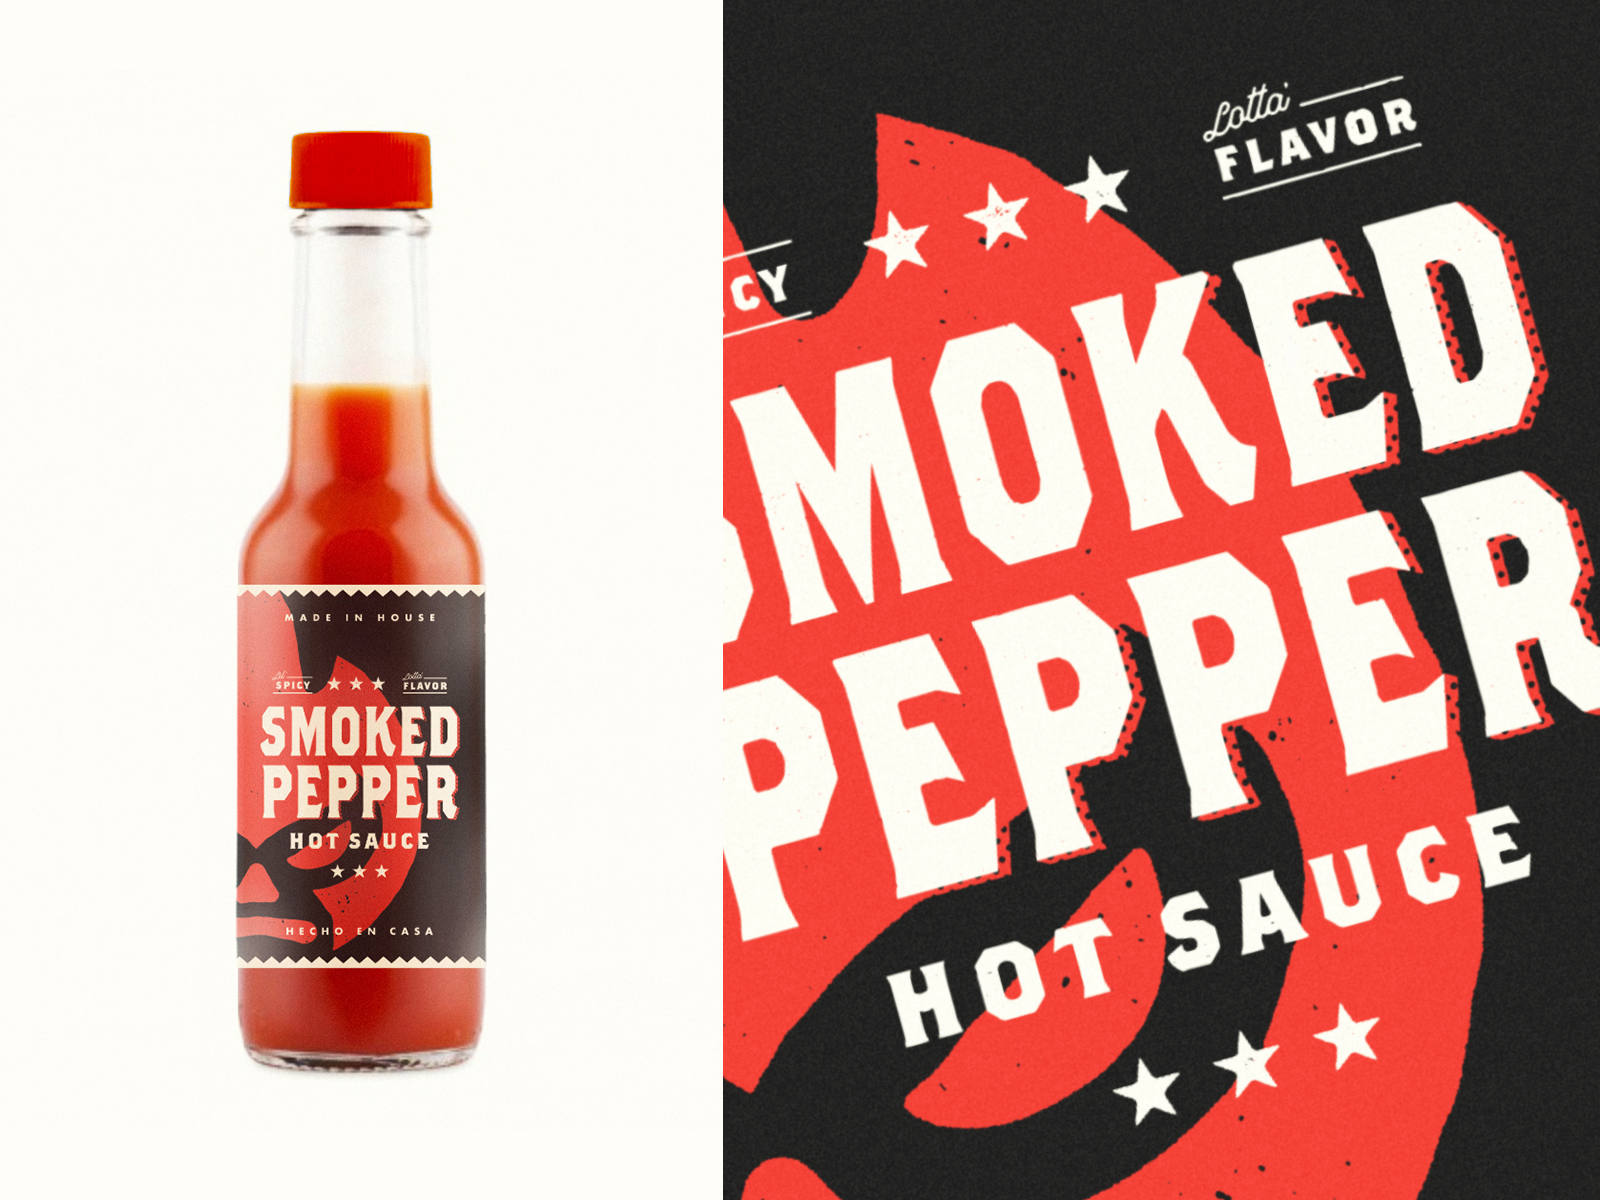 Smoked Pepper Hot Sauce Label by Nick DeVore on Dribbble